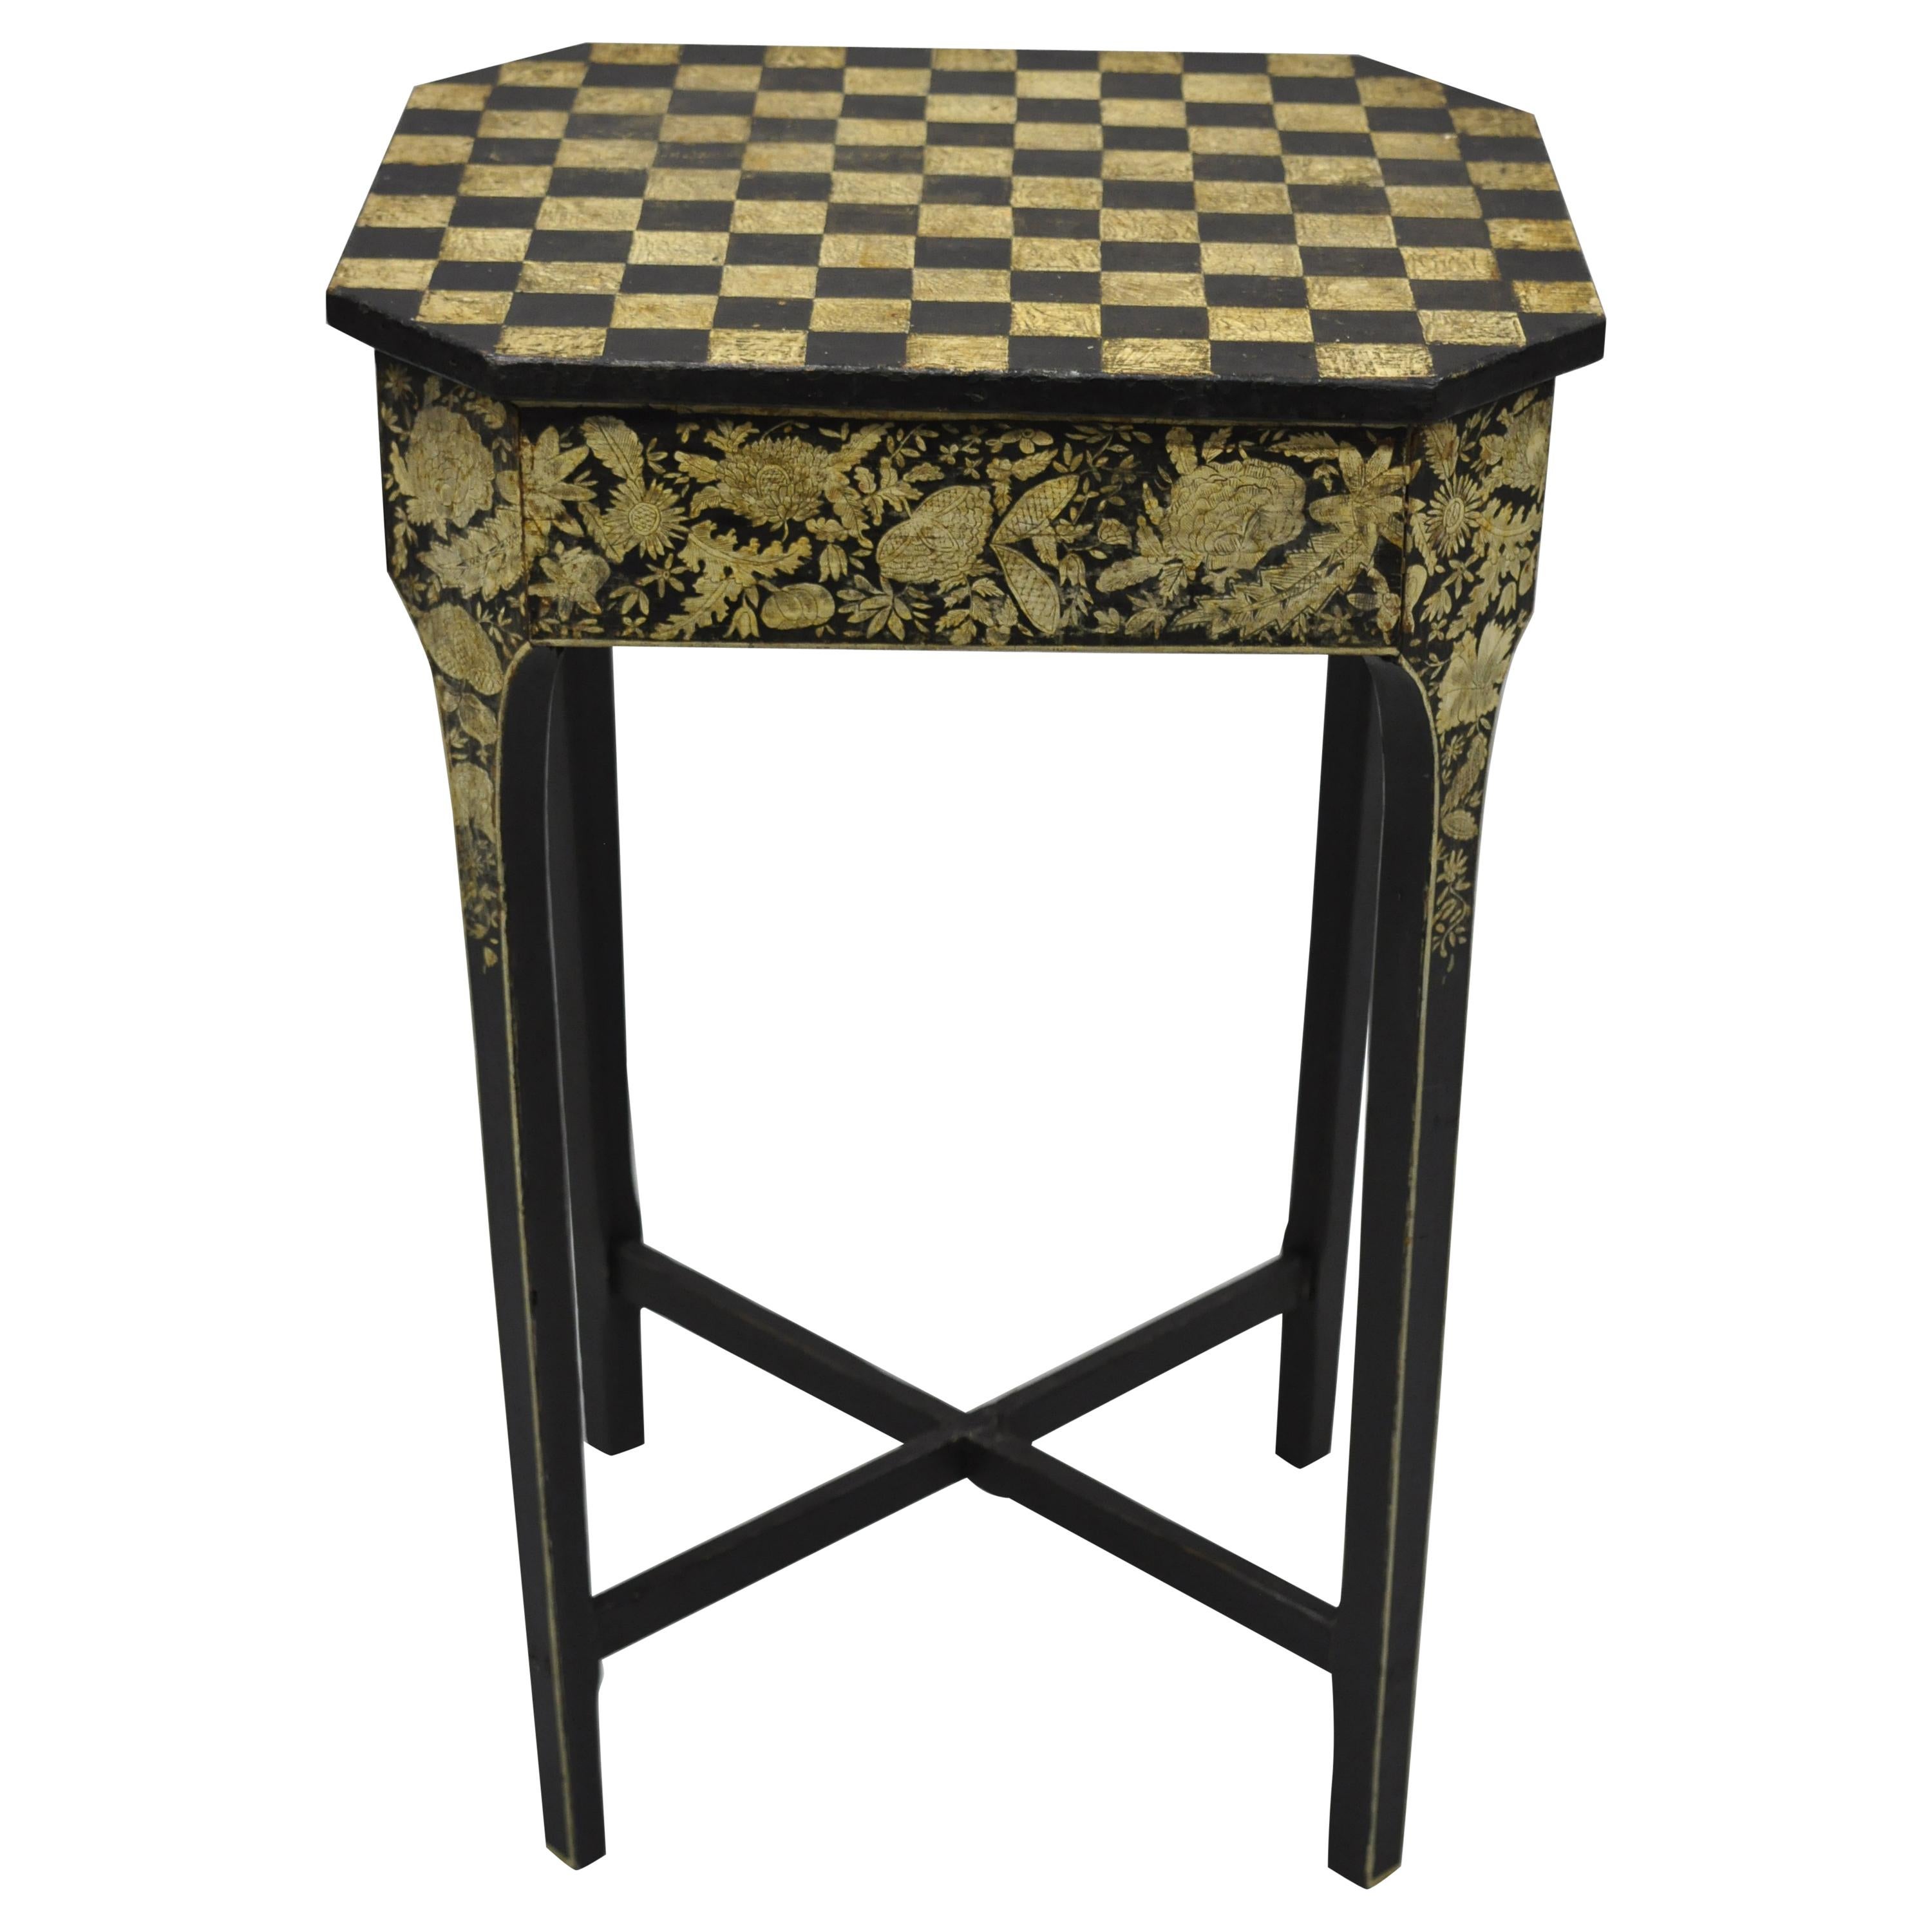 19th C. Hand Painted Black and Cream Checkerboard Victorian Accent Side Table